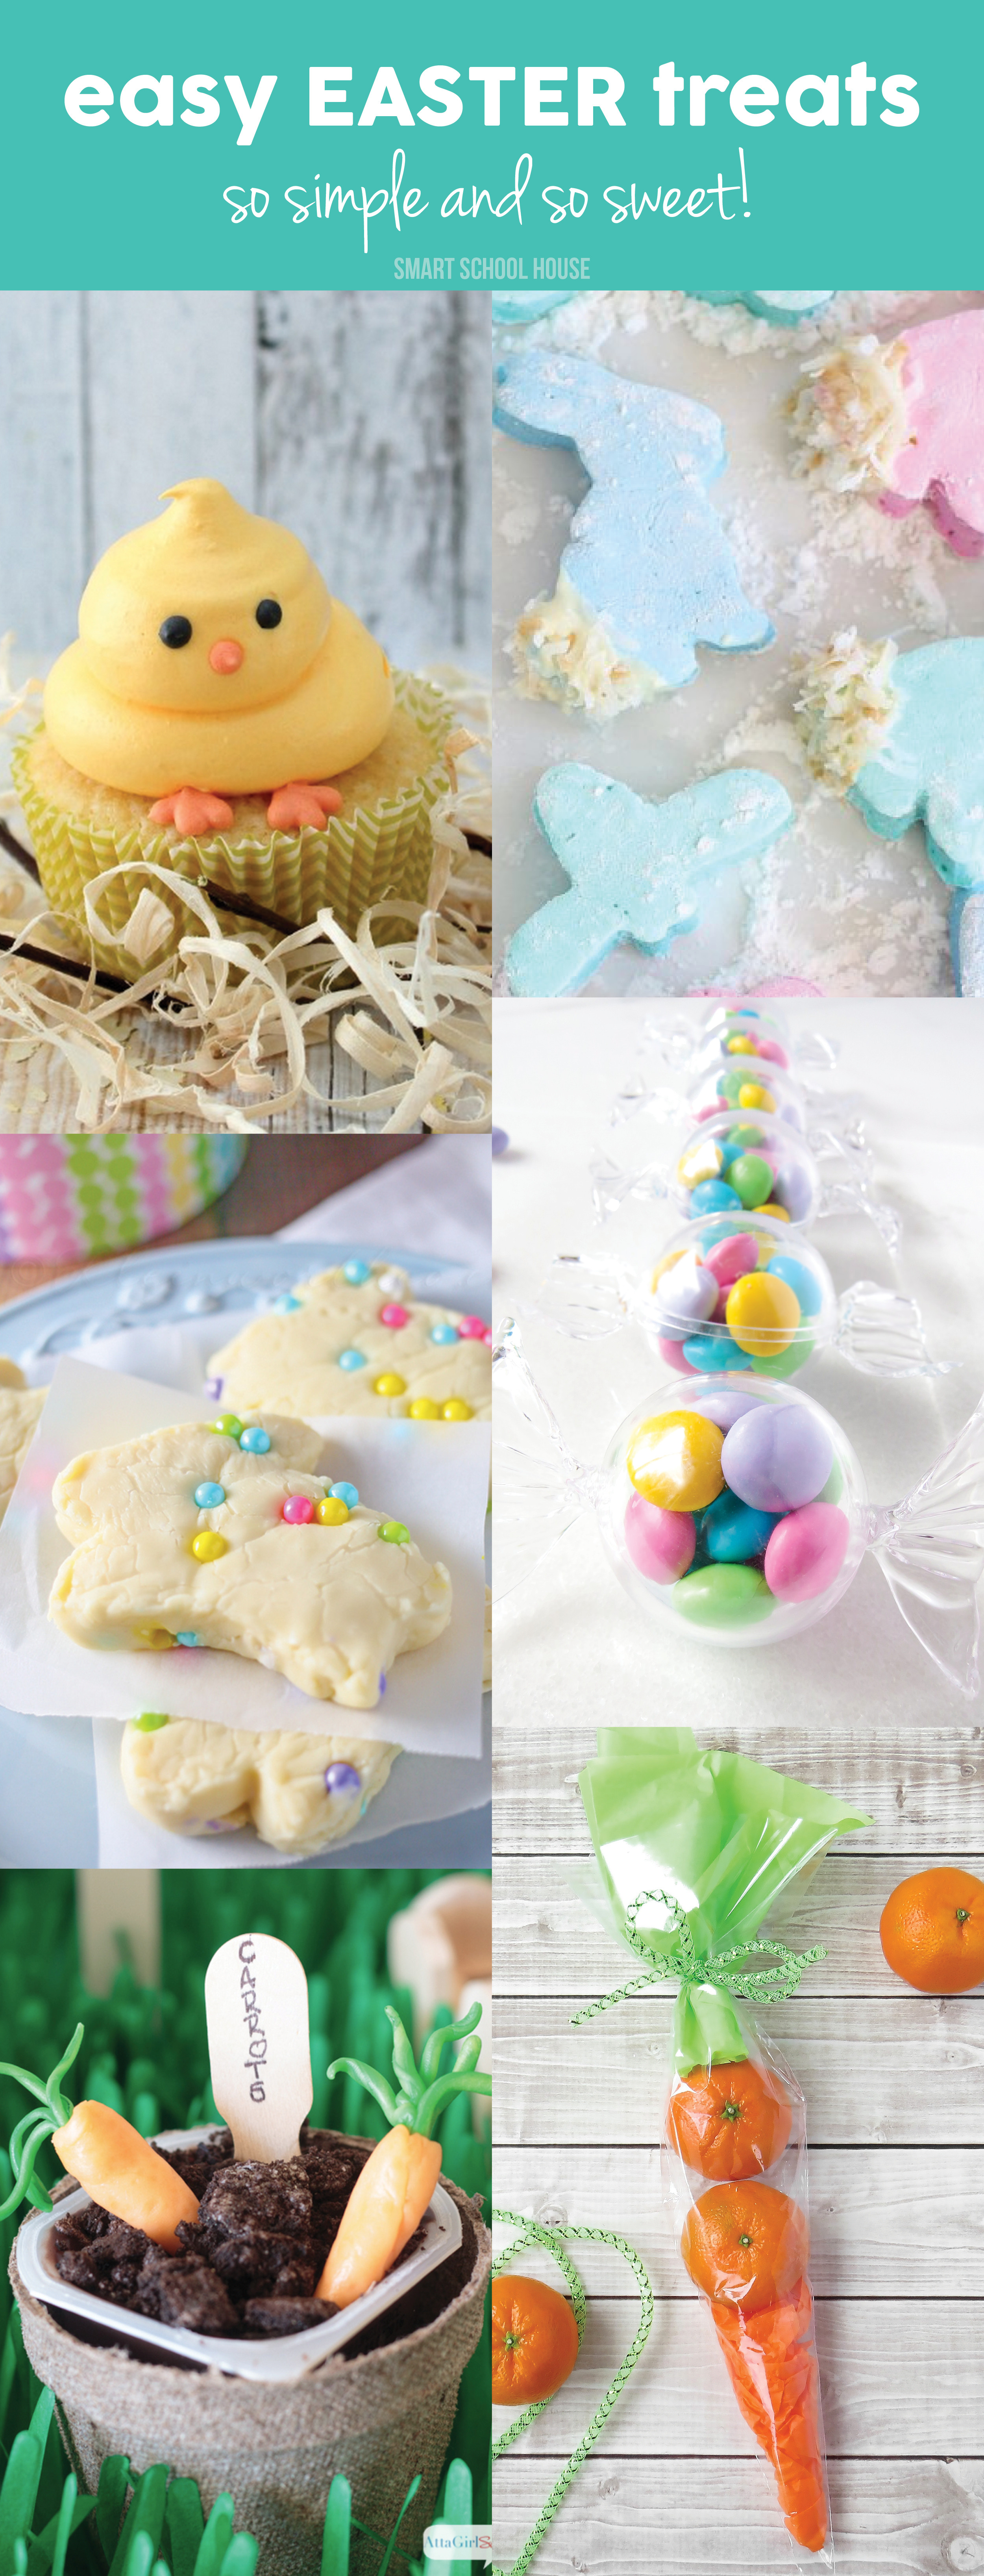 Quick Easy Easter Desserts
 easy easter treats